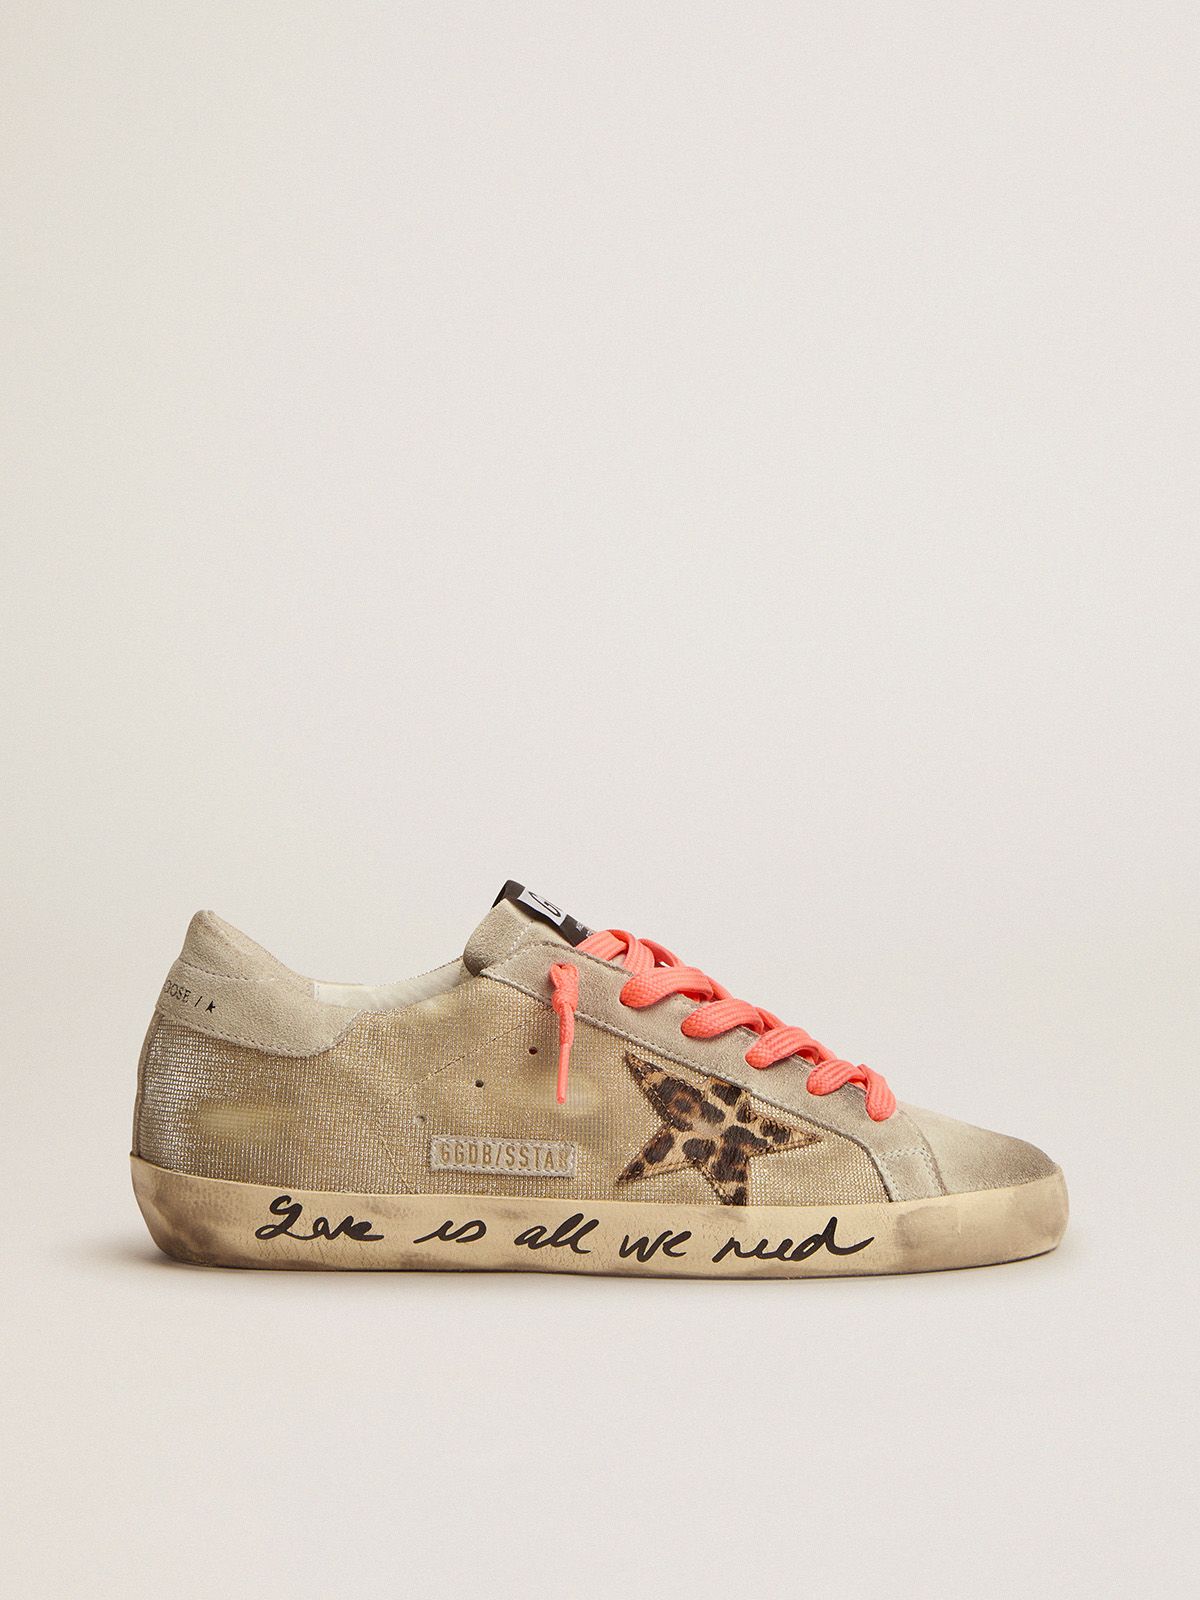 Golden Super-Star sneakers with checkered pattern and hand lettering on the foxing